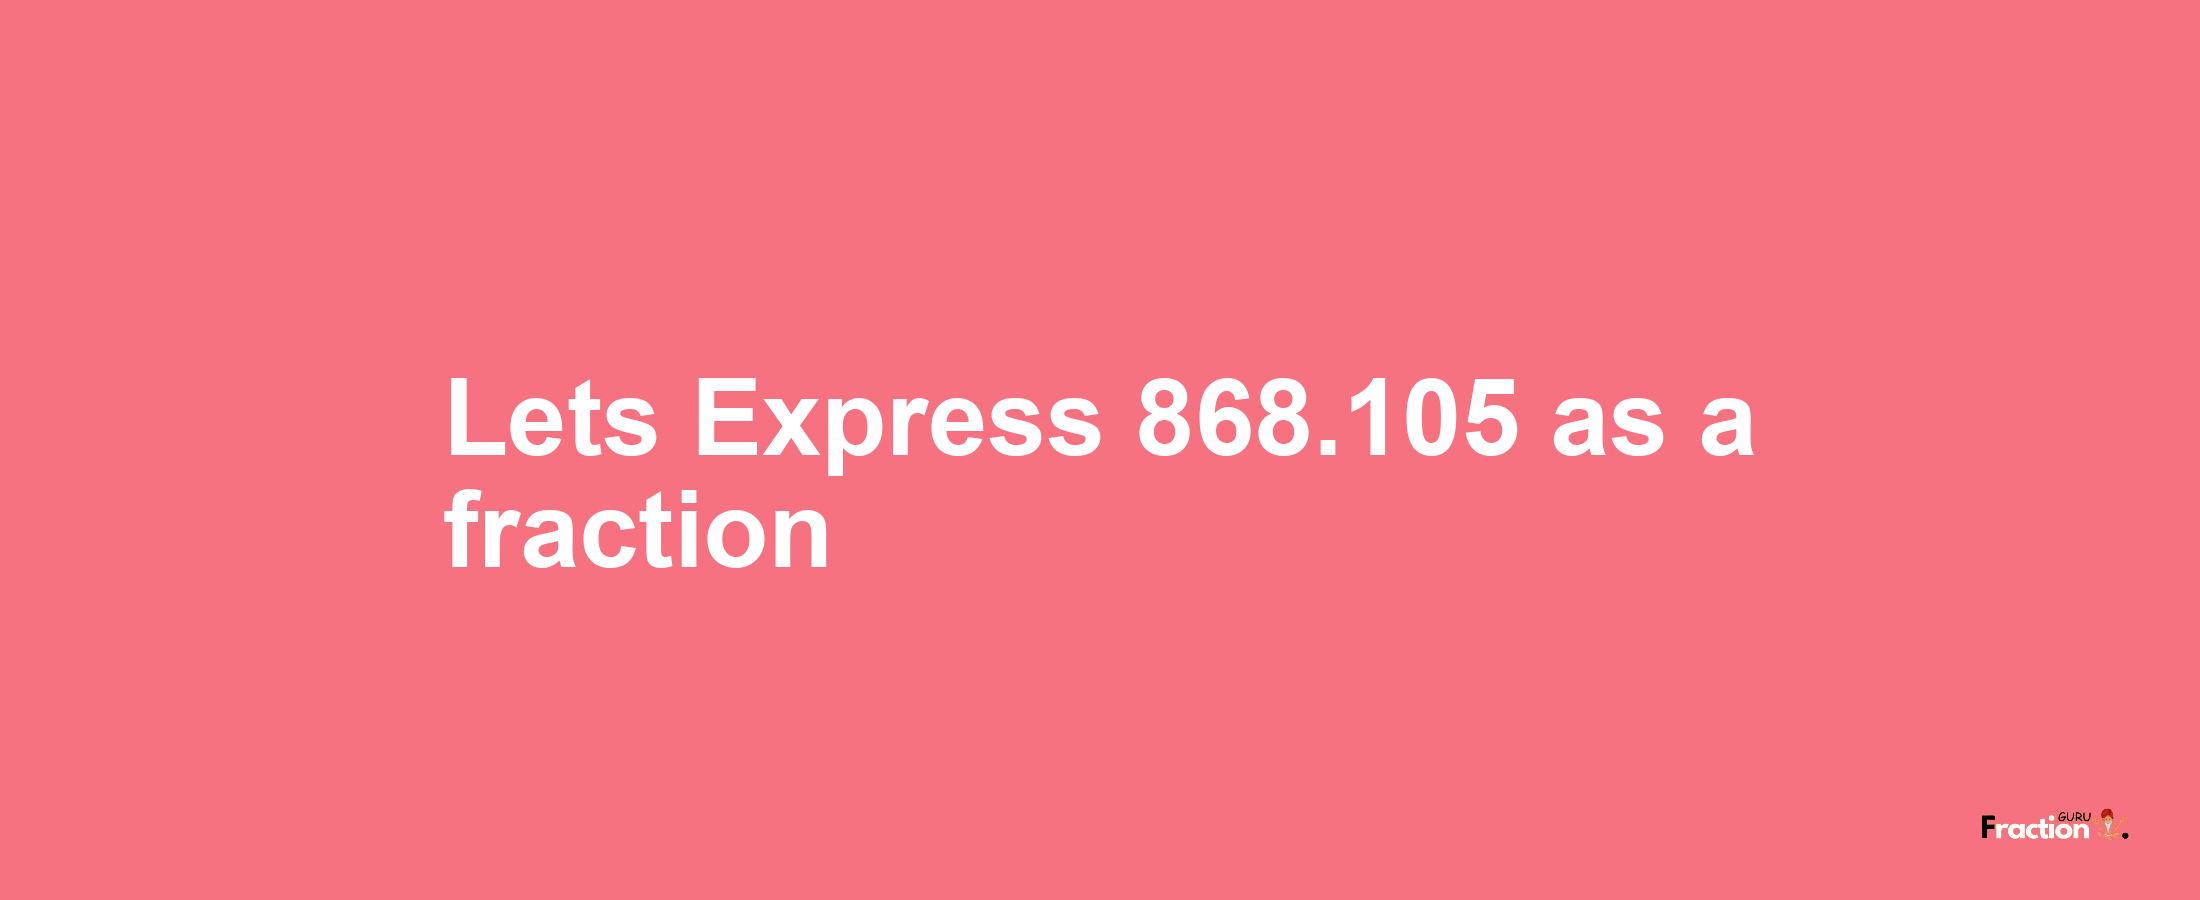 Lets Express 868.105 as afraction